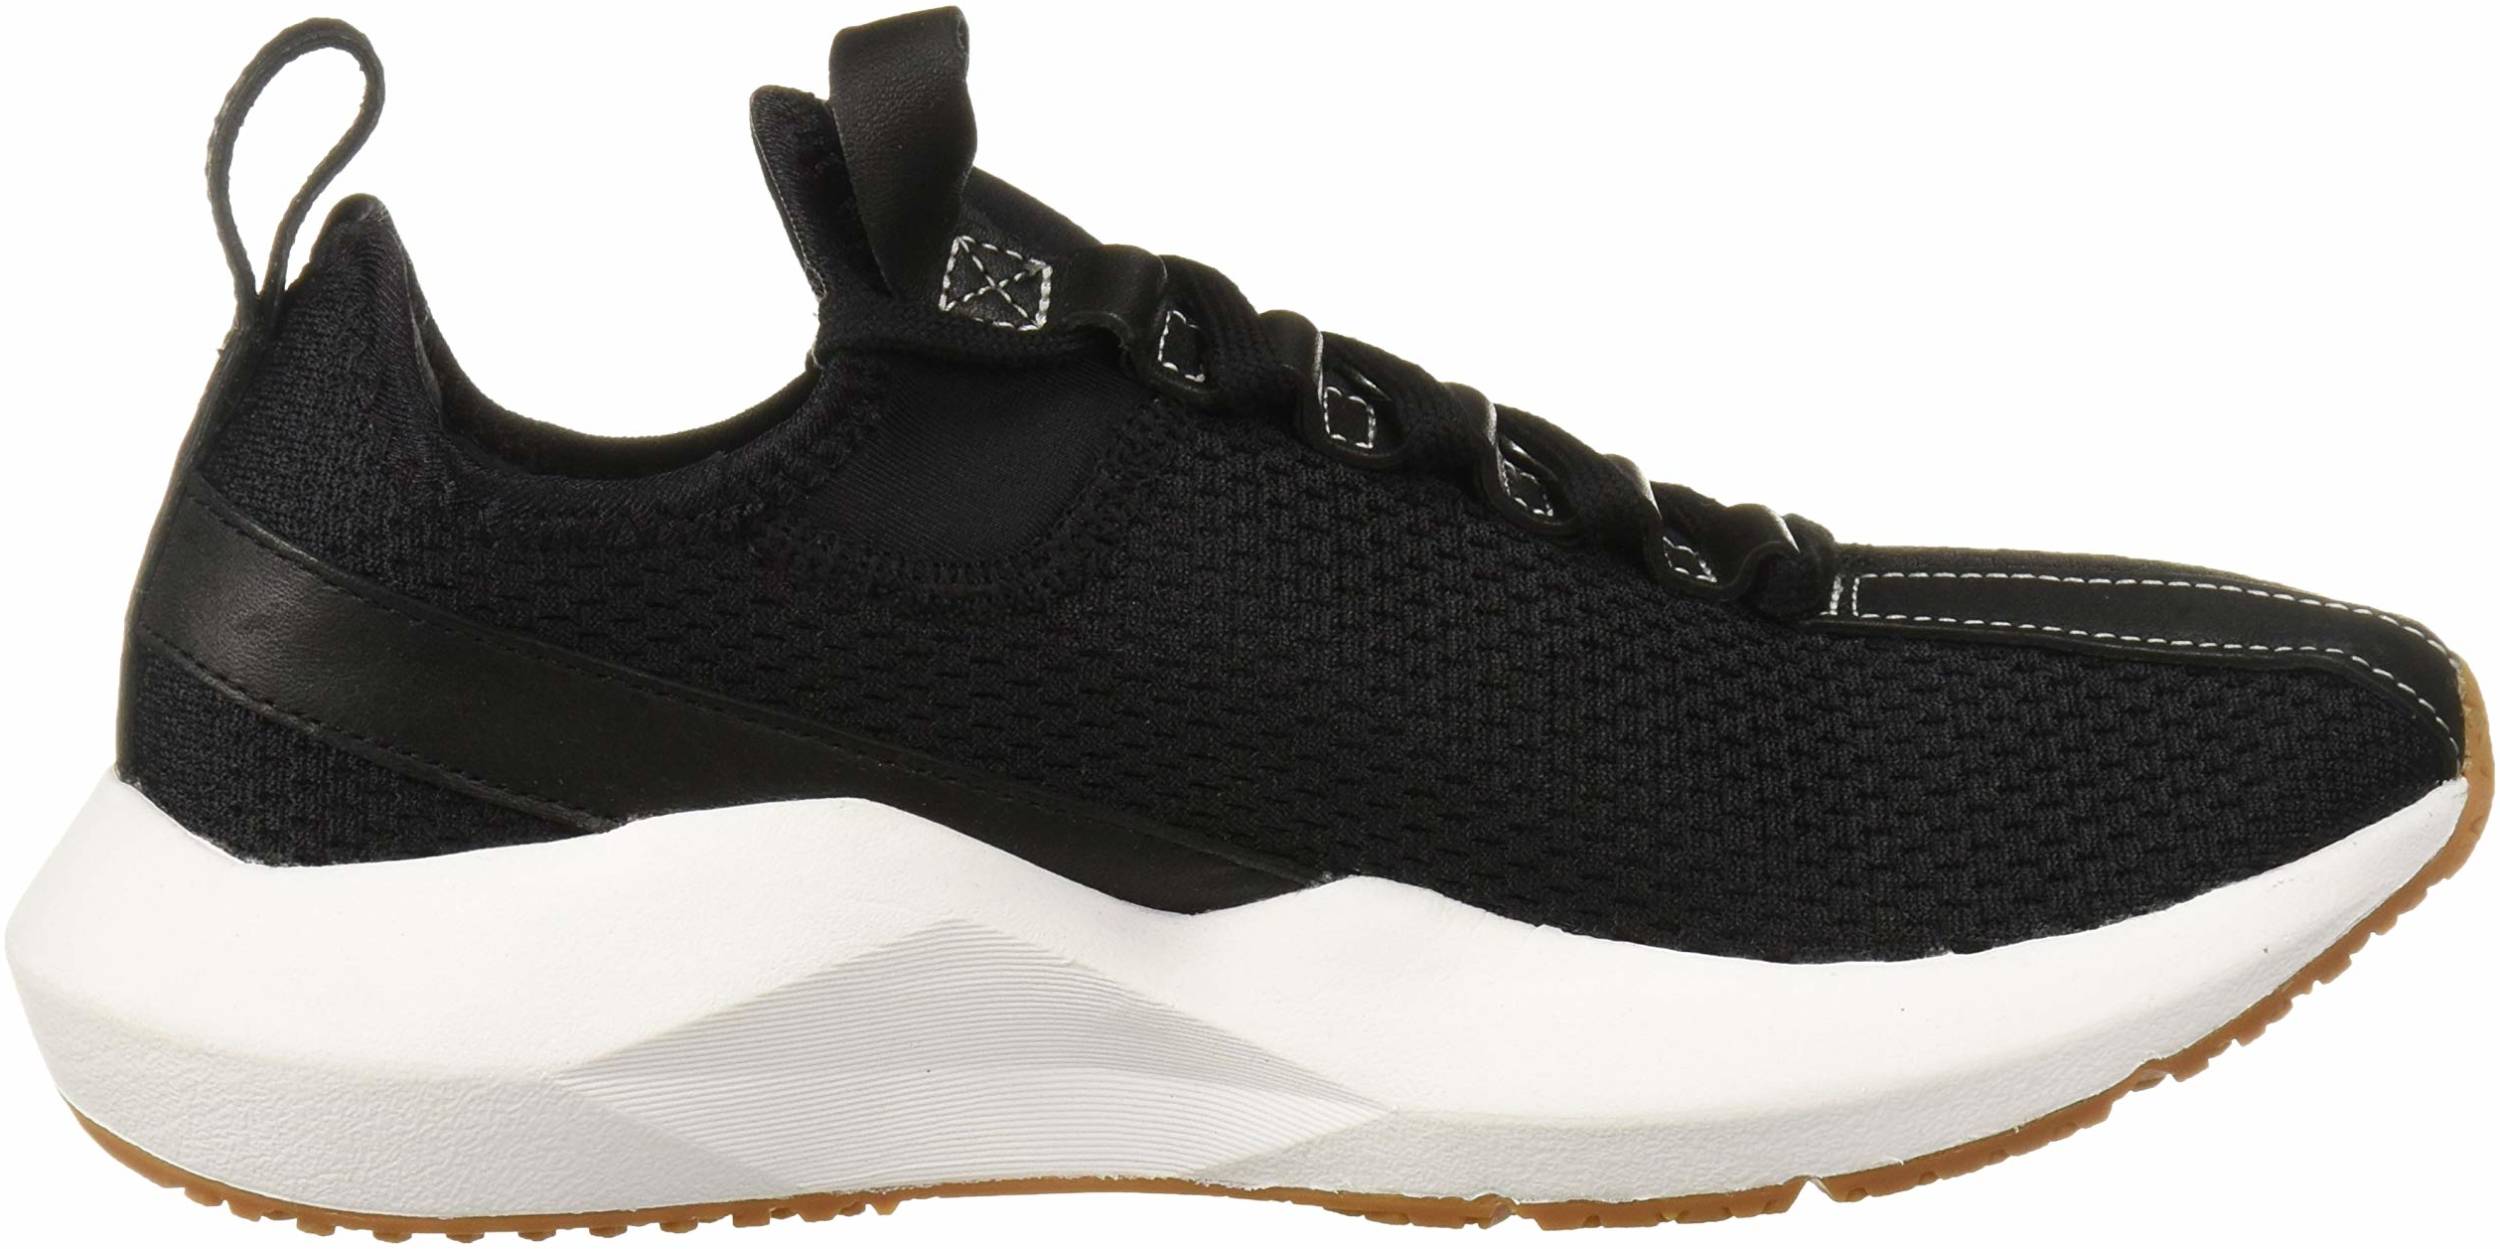 Only $36 + Review of Reebok Sole Fury Lux | RunRepeat